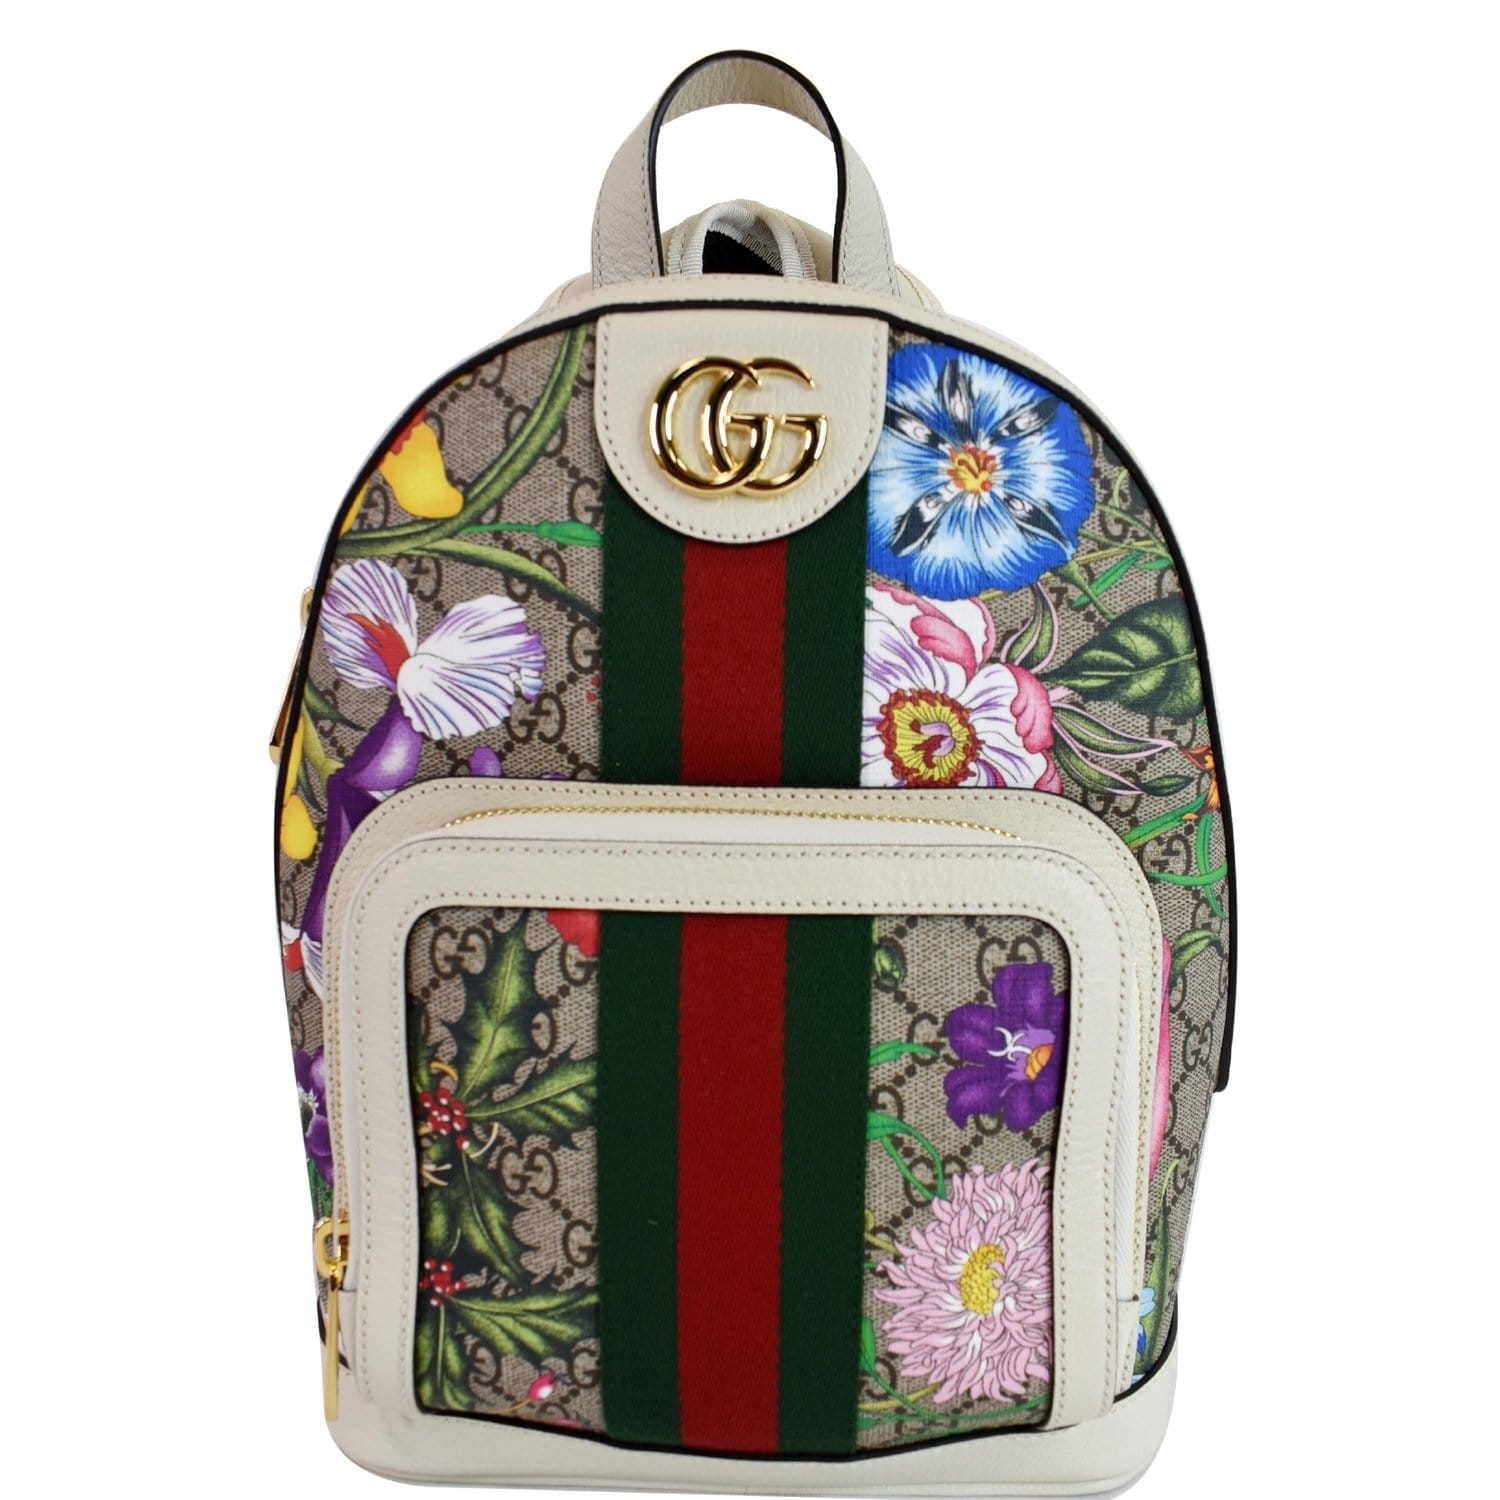 Gucci Ophidia GG Supreme Small Backpack Beige Red/Green Web Brown Cloth  ref.664670 - Joli Closet